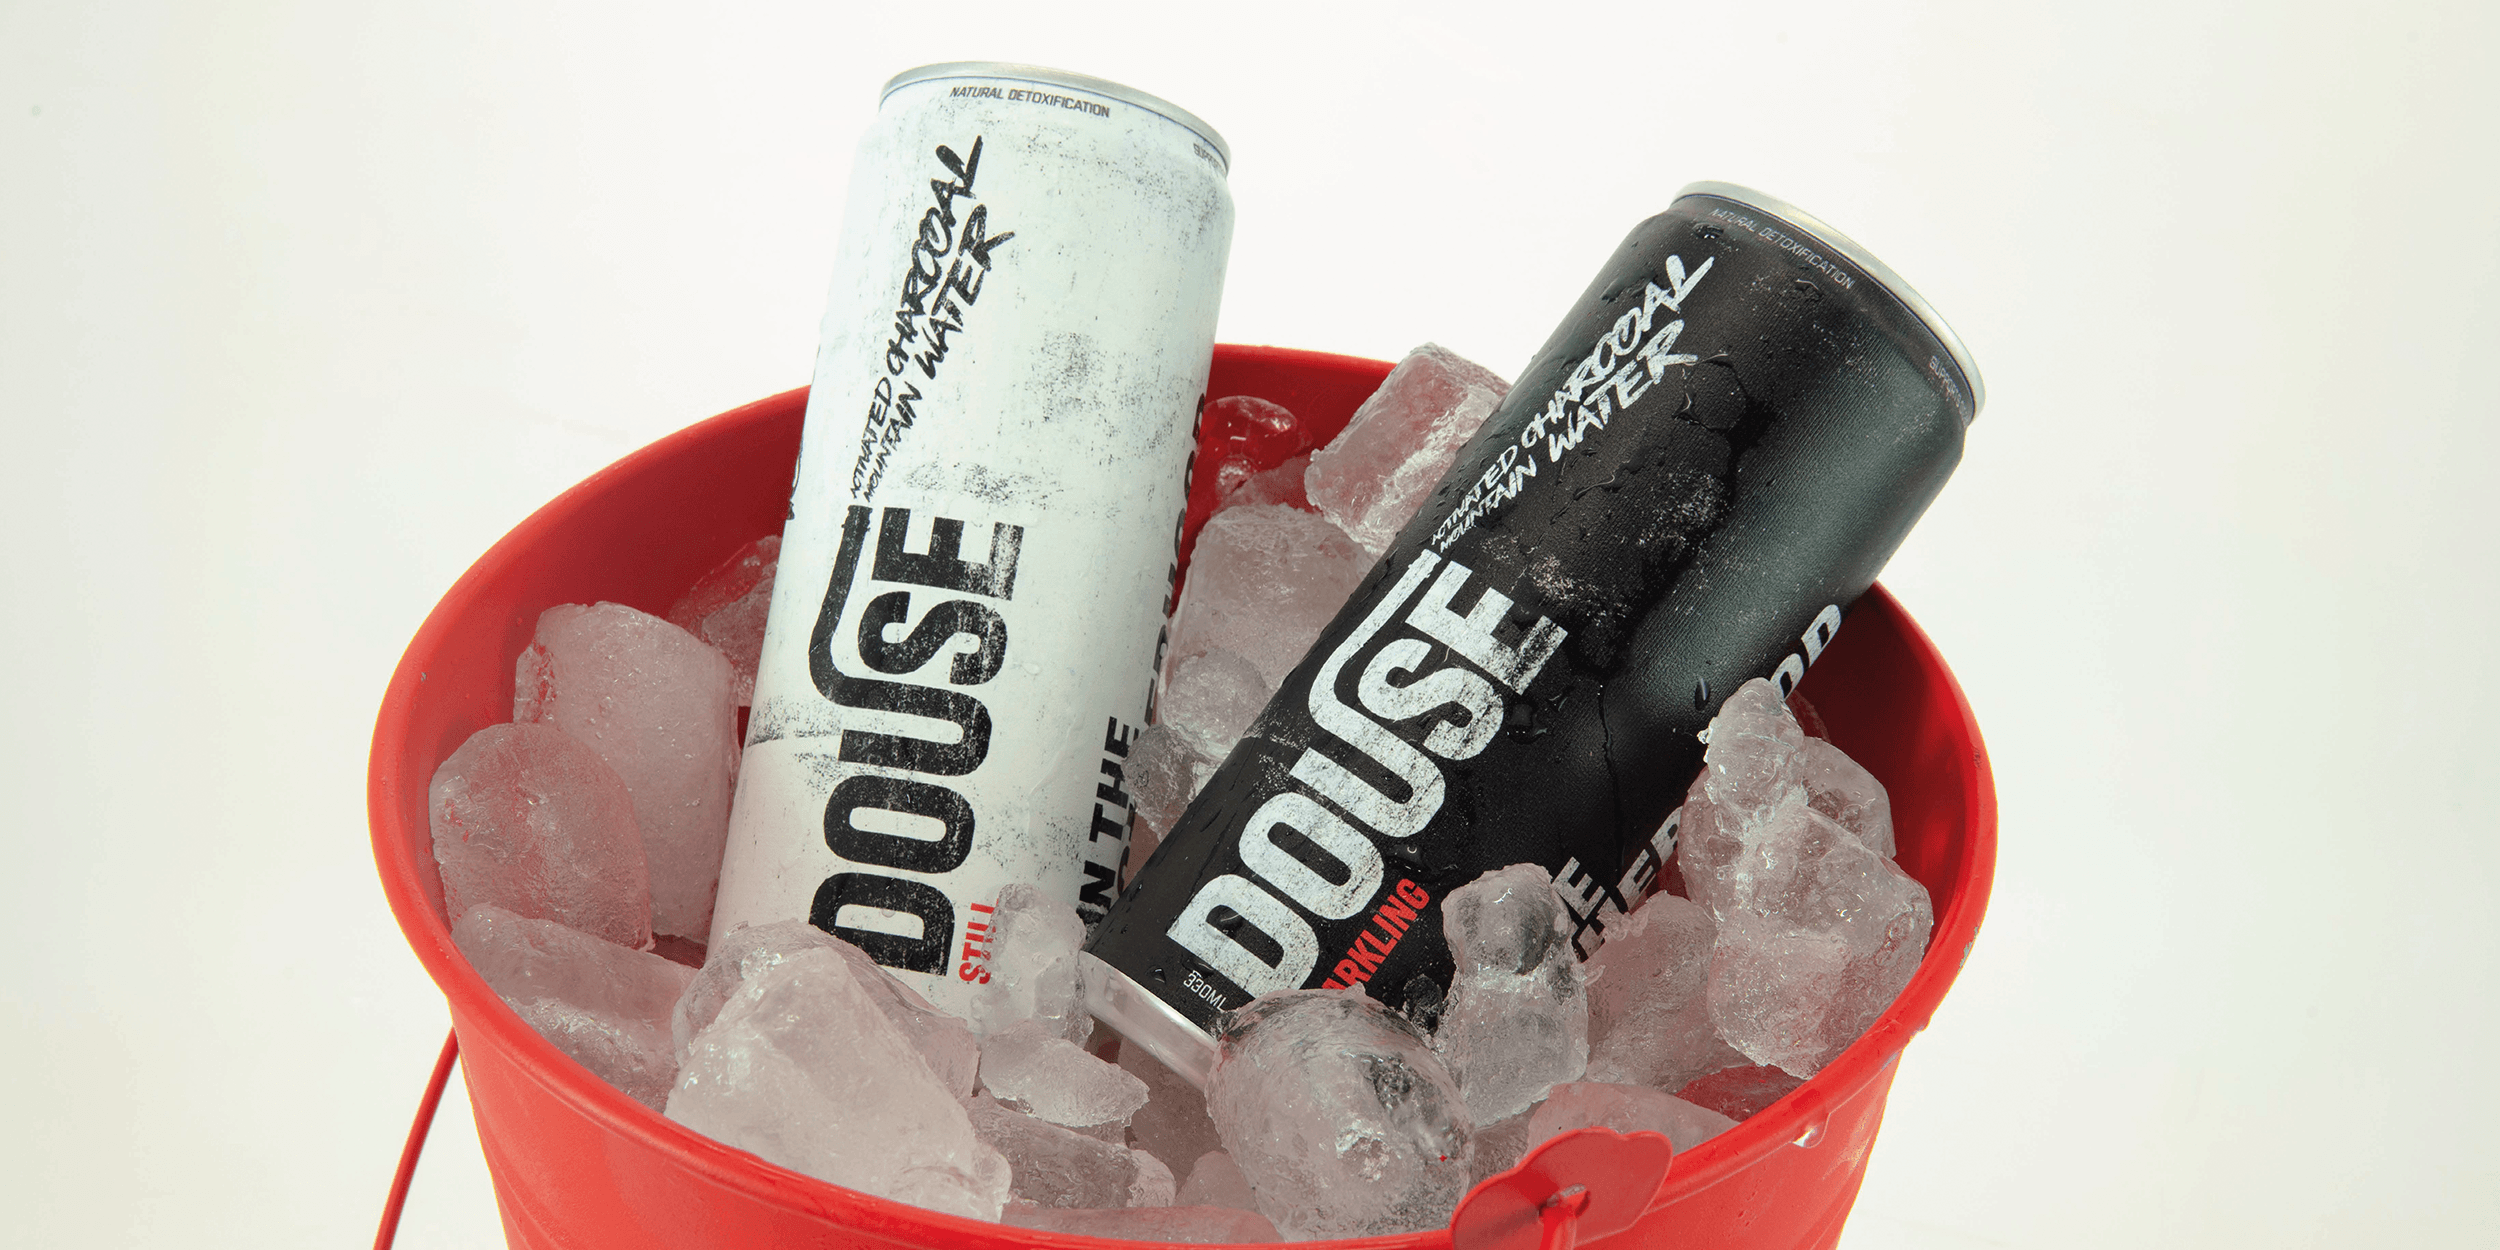 ord douse, with charcoal texted type spraying out to resemble the charcoal water extinguishing the toxins in your body. The logo acts as a tool across the advertising to spread messages about the brand.